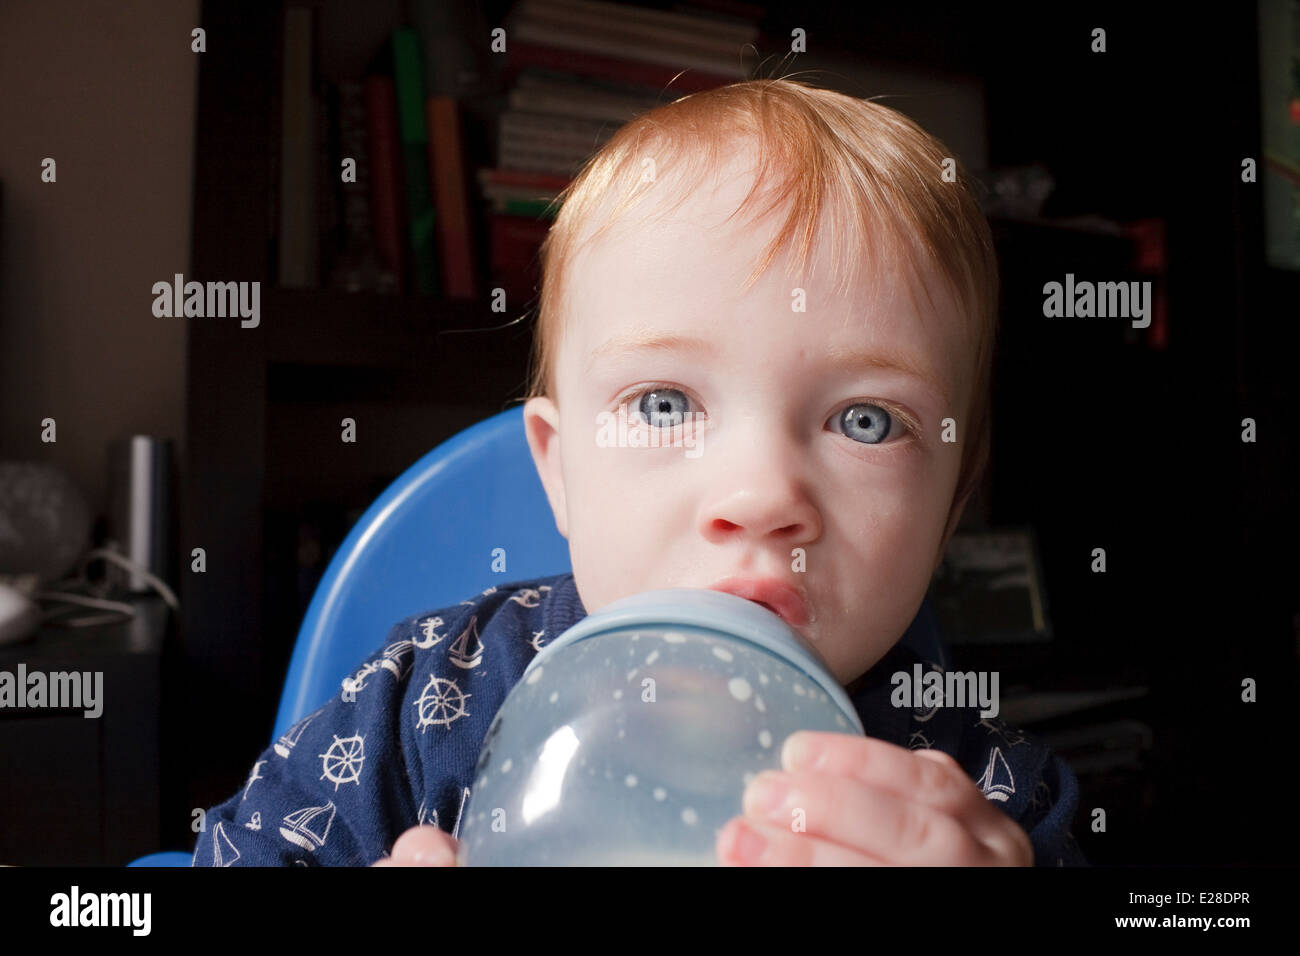 An 11-month old baby boy drinking milk from a bottle Stock Photo